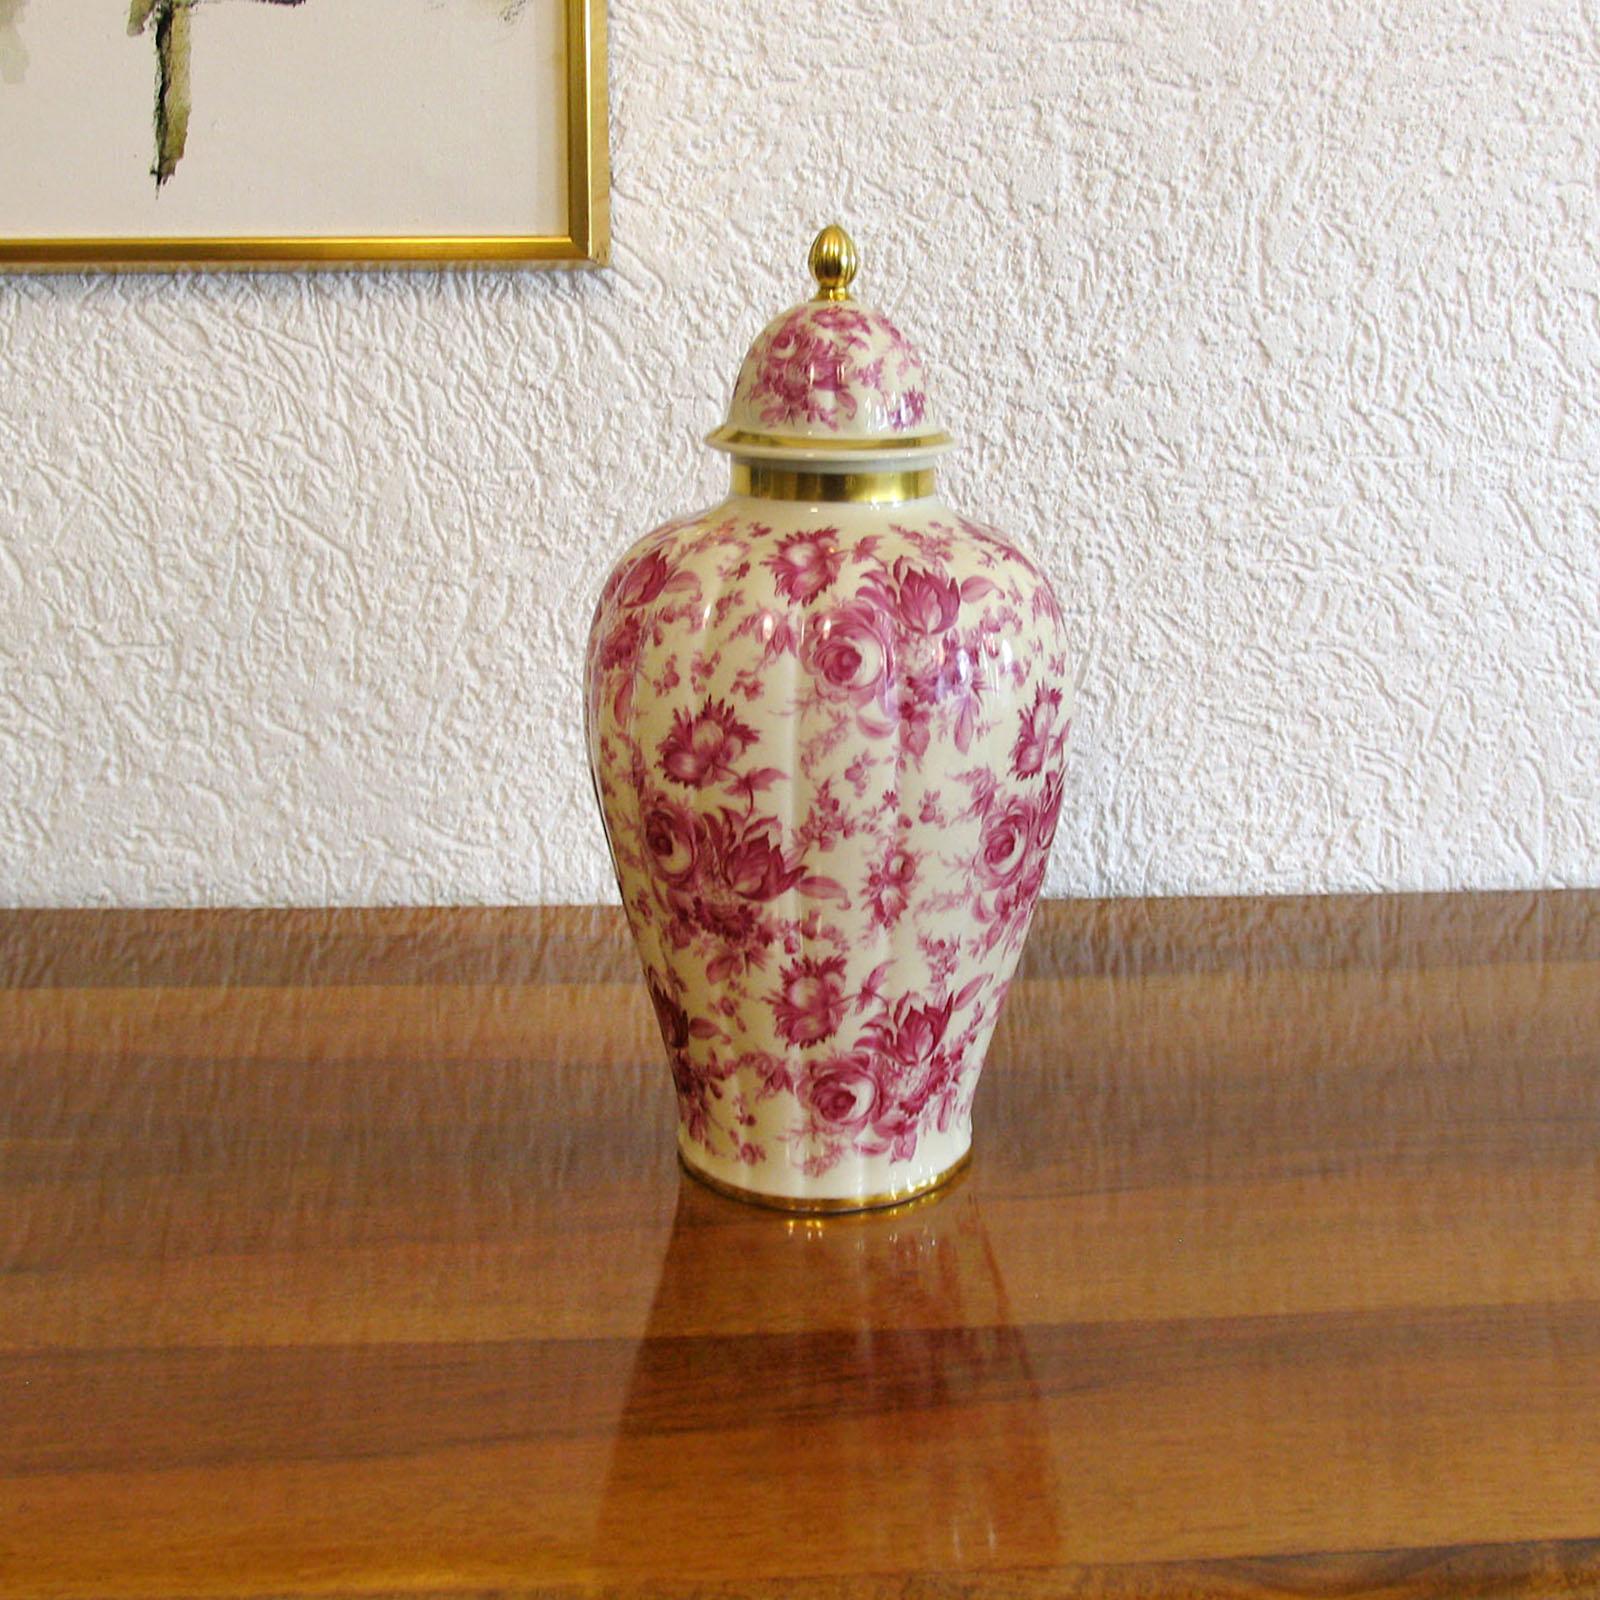 Thomas ivory Bavaria Urn with Lid, Circa 1946-1949. Green stamp Thomas Ivory Bavaria Germany US Zone 03179 25. Excellent condition

This is a sensational piece. Beautiful floral design, chintz like, in various shades of pink against an ivory color